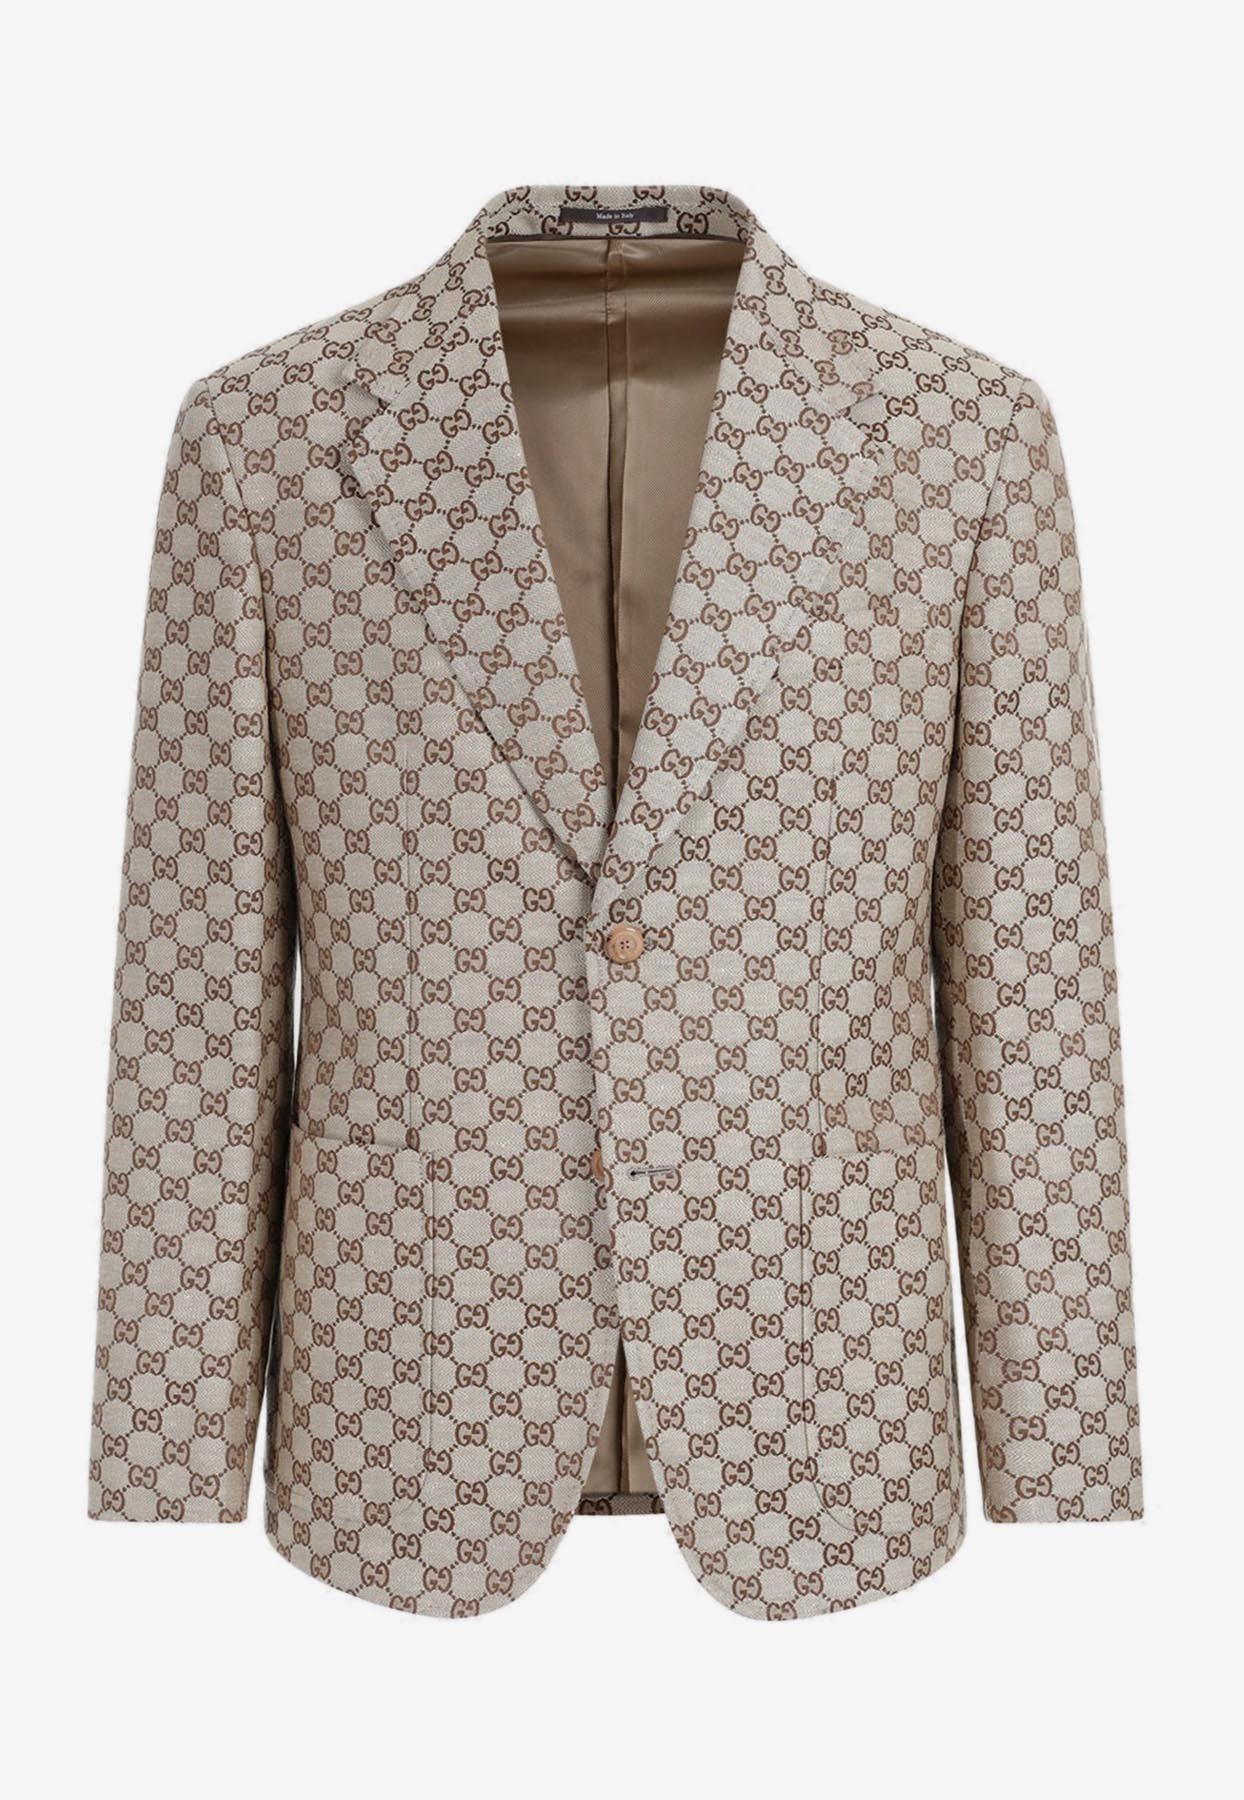 Single-breasted, jersey jacket with all-over jacquard motif